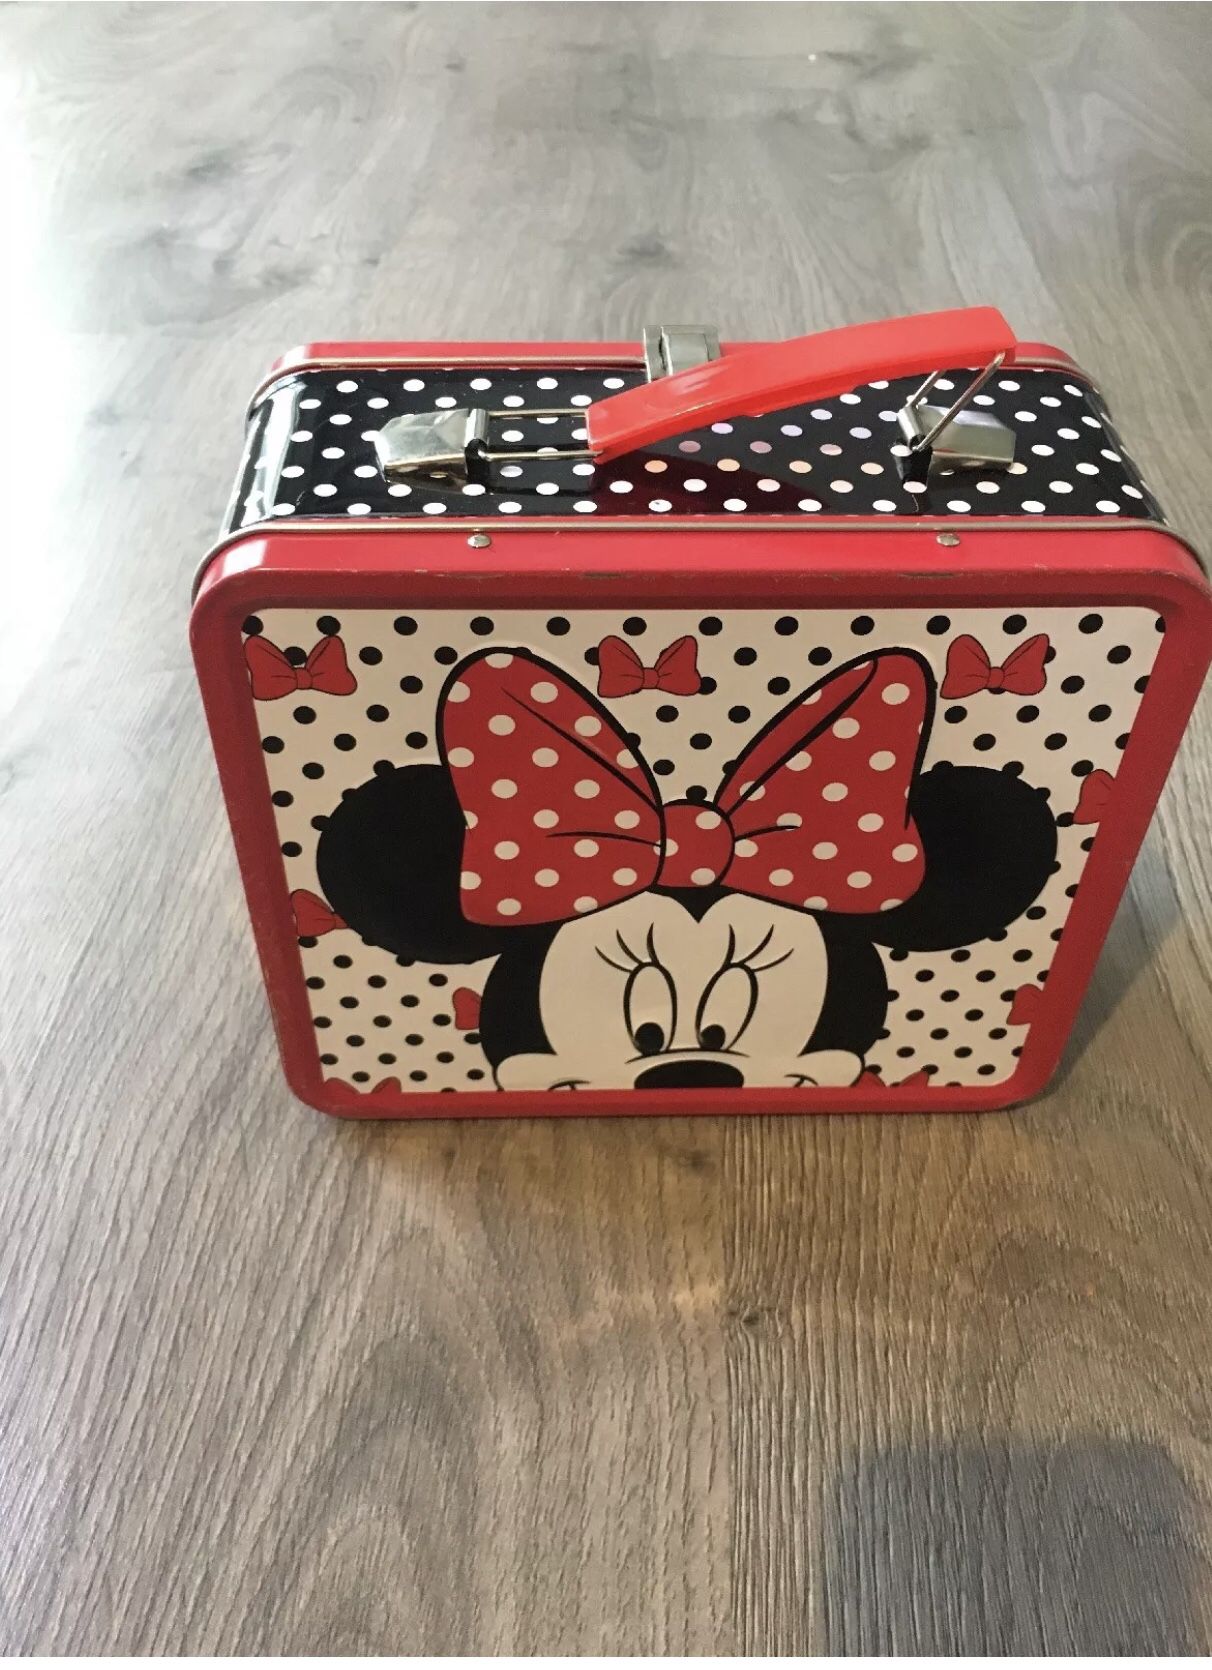 Girls Disney Minnie Mouse lunch box / tin tote - Back to school!